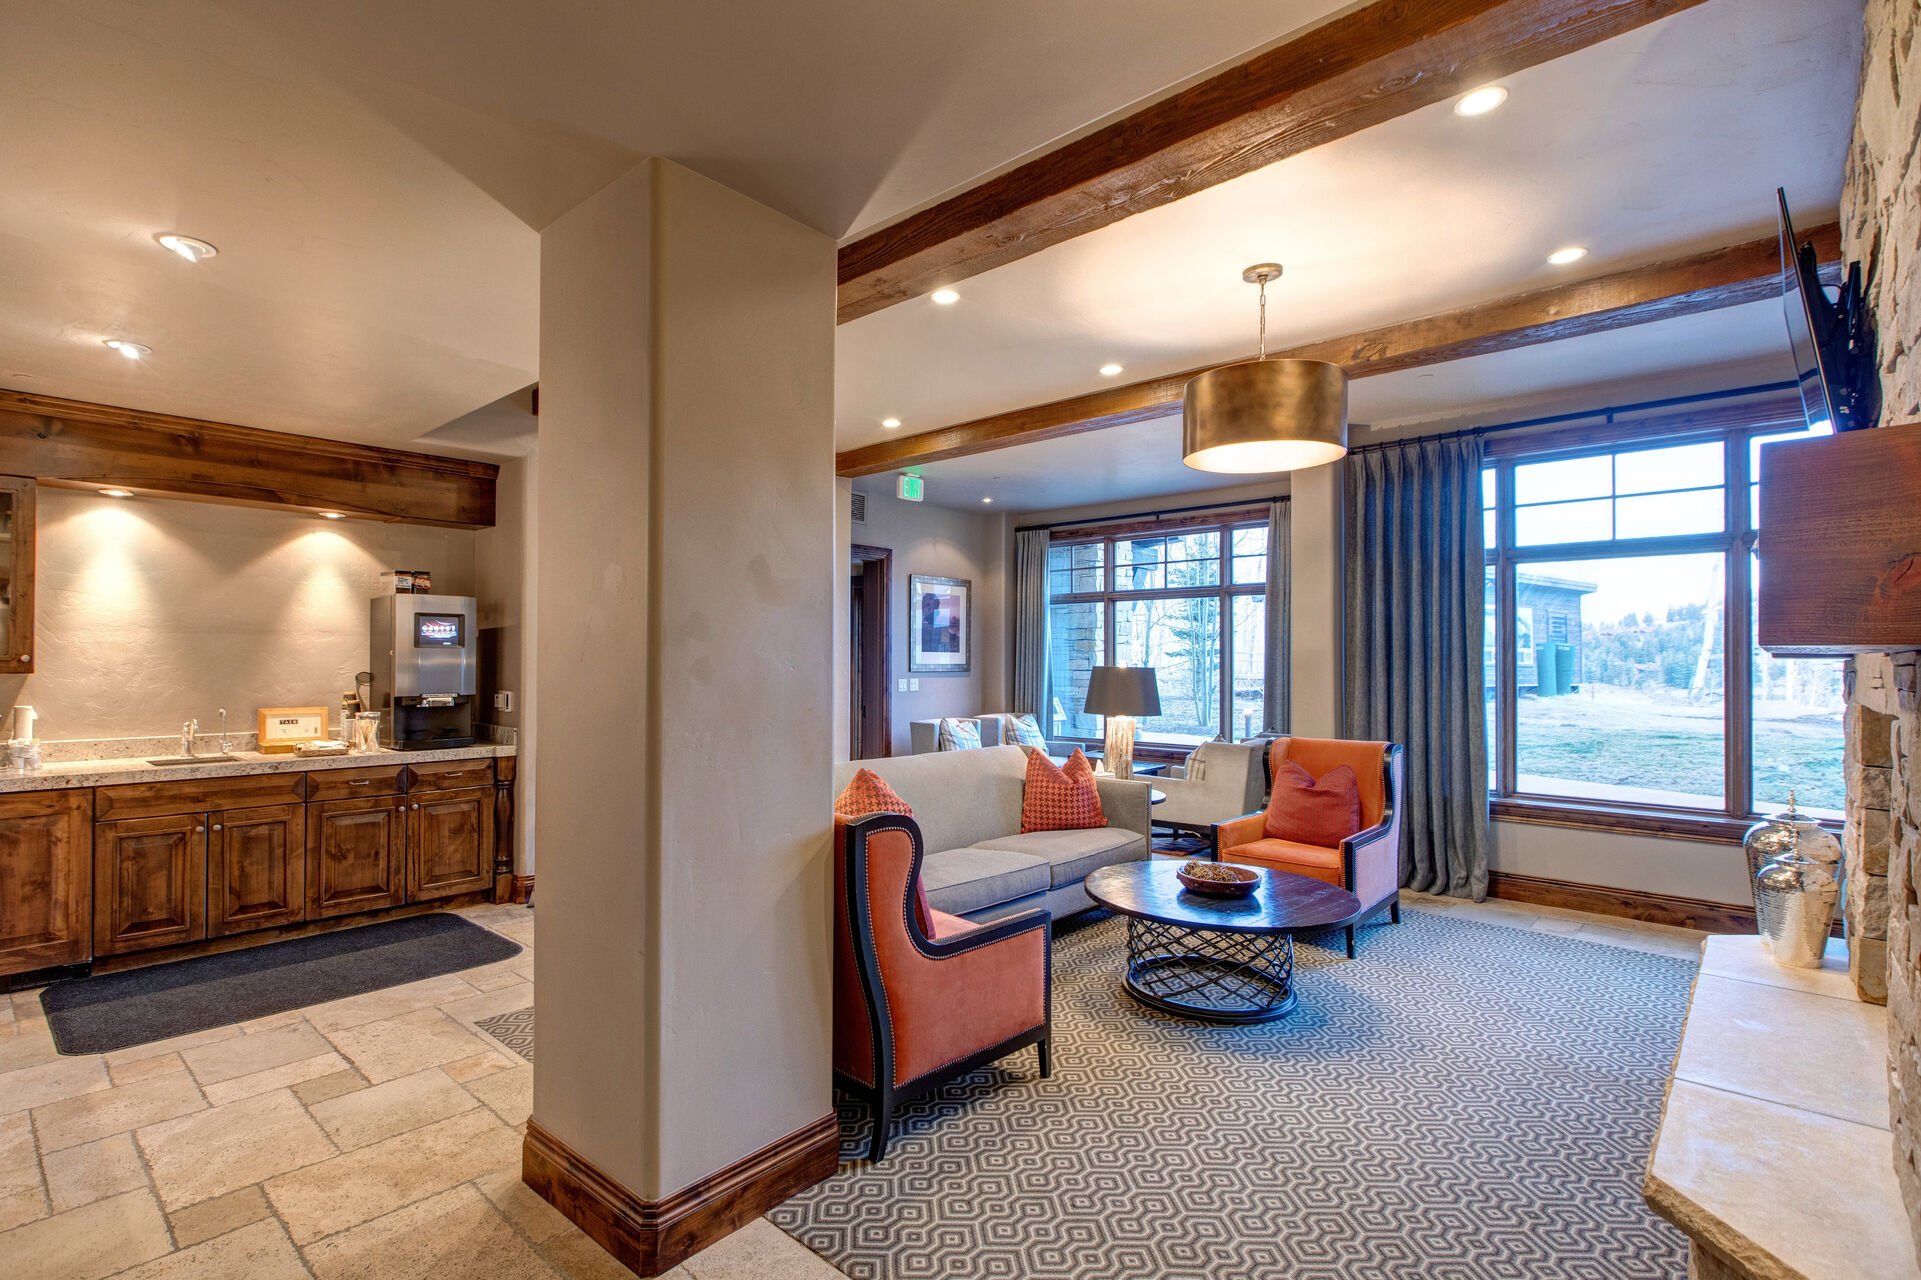 Skier's Lounge with a Gas Fireplace, Complimentary Coffee/Tea and Ski-in, Ski-out Access